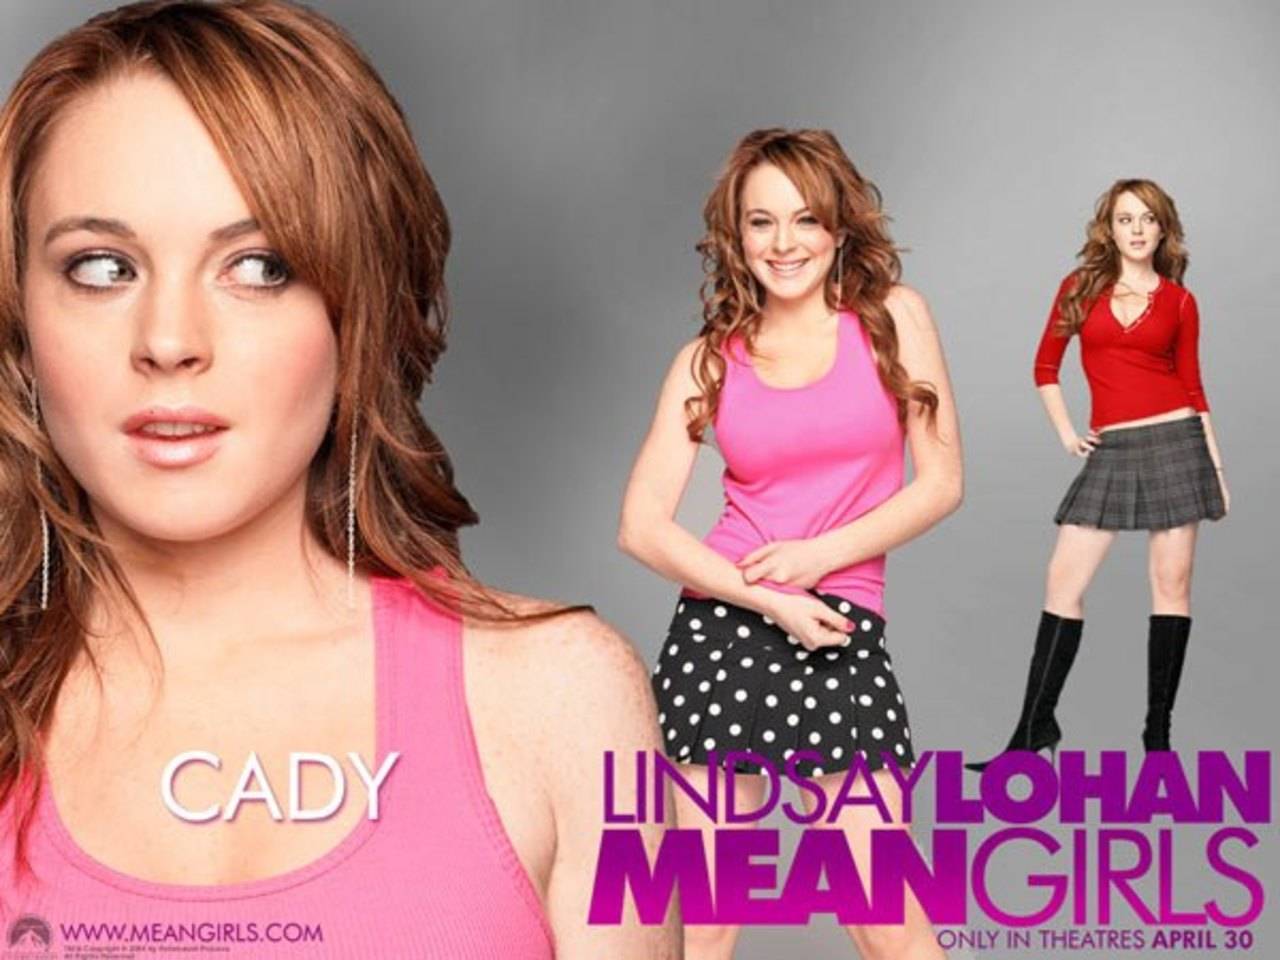 Mean Girls Musical Movie: Everything to Know